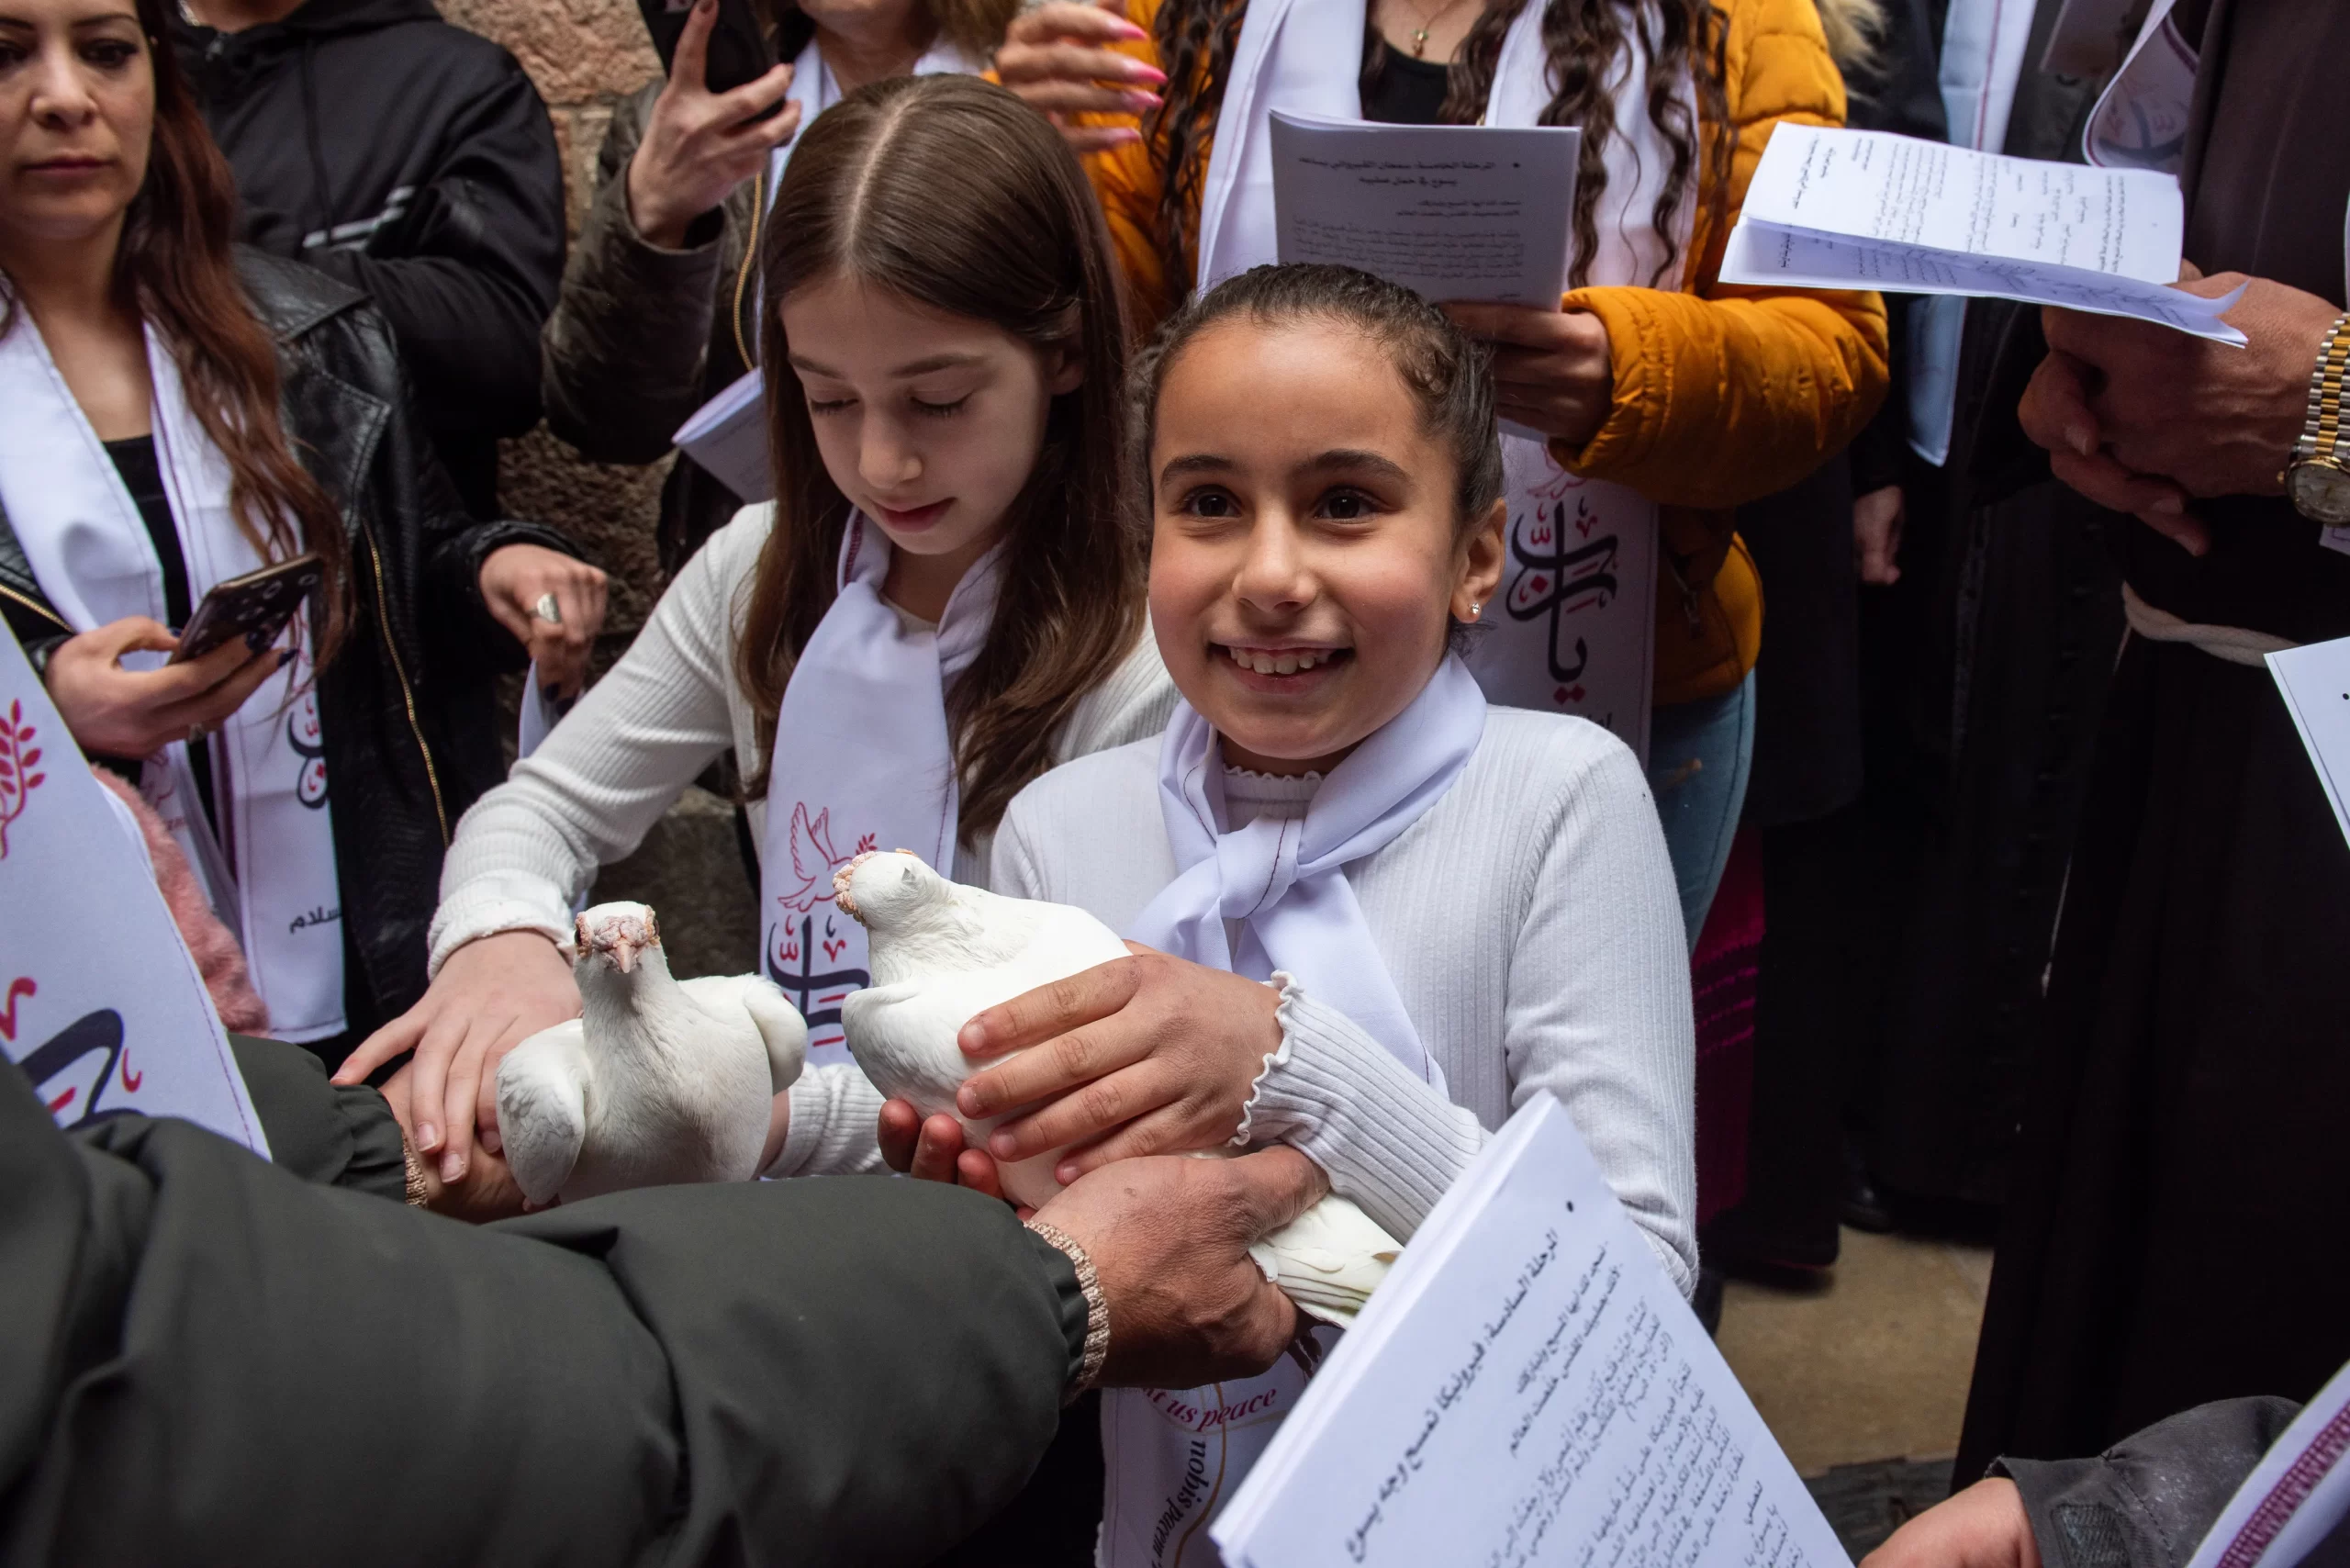 Two children hold doves, which they released moments later, during the Way of the Cross for Christian school students in Jerusalem on Friday, Feb. 23, 2024. The first eight stations took place along the traditional Via Dolorosa route and at each station, after the Scripture reading and prayer, two children released a pair of doves, a visible sign of the prayer for peace and freedom raised by the younger participants. Credit: Marinella Bandini